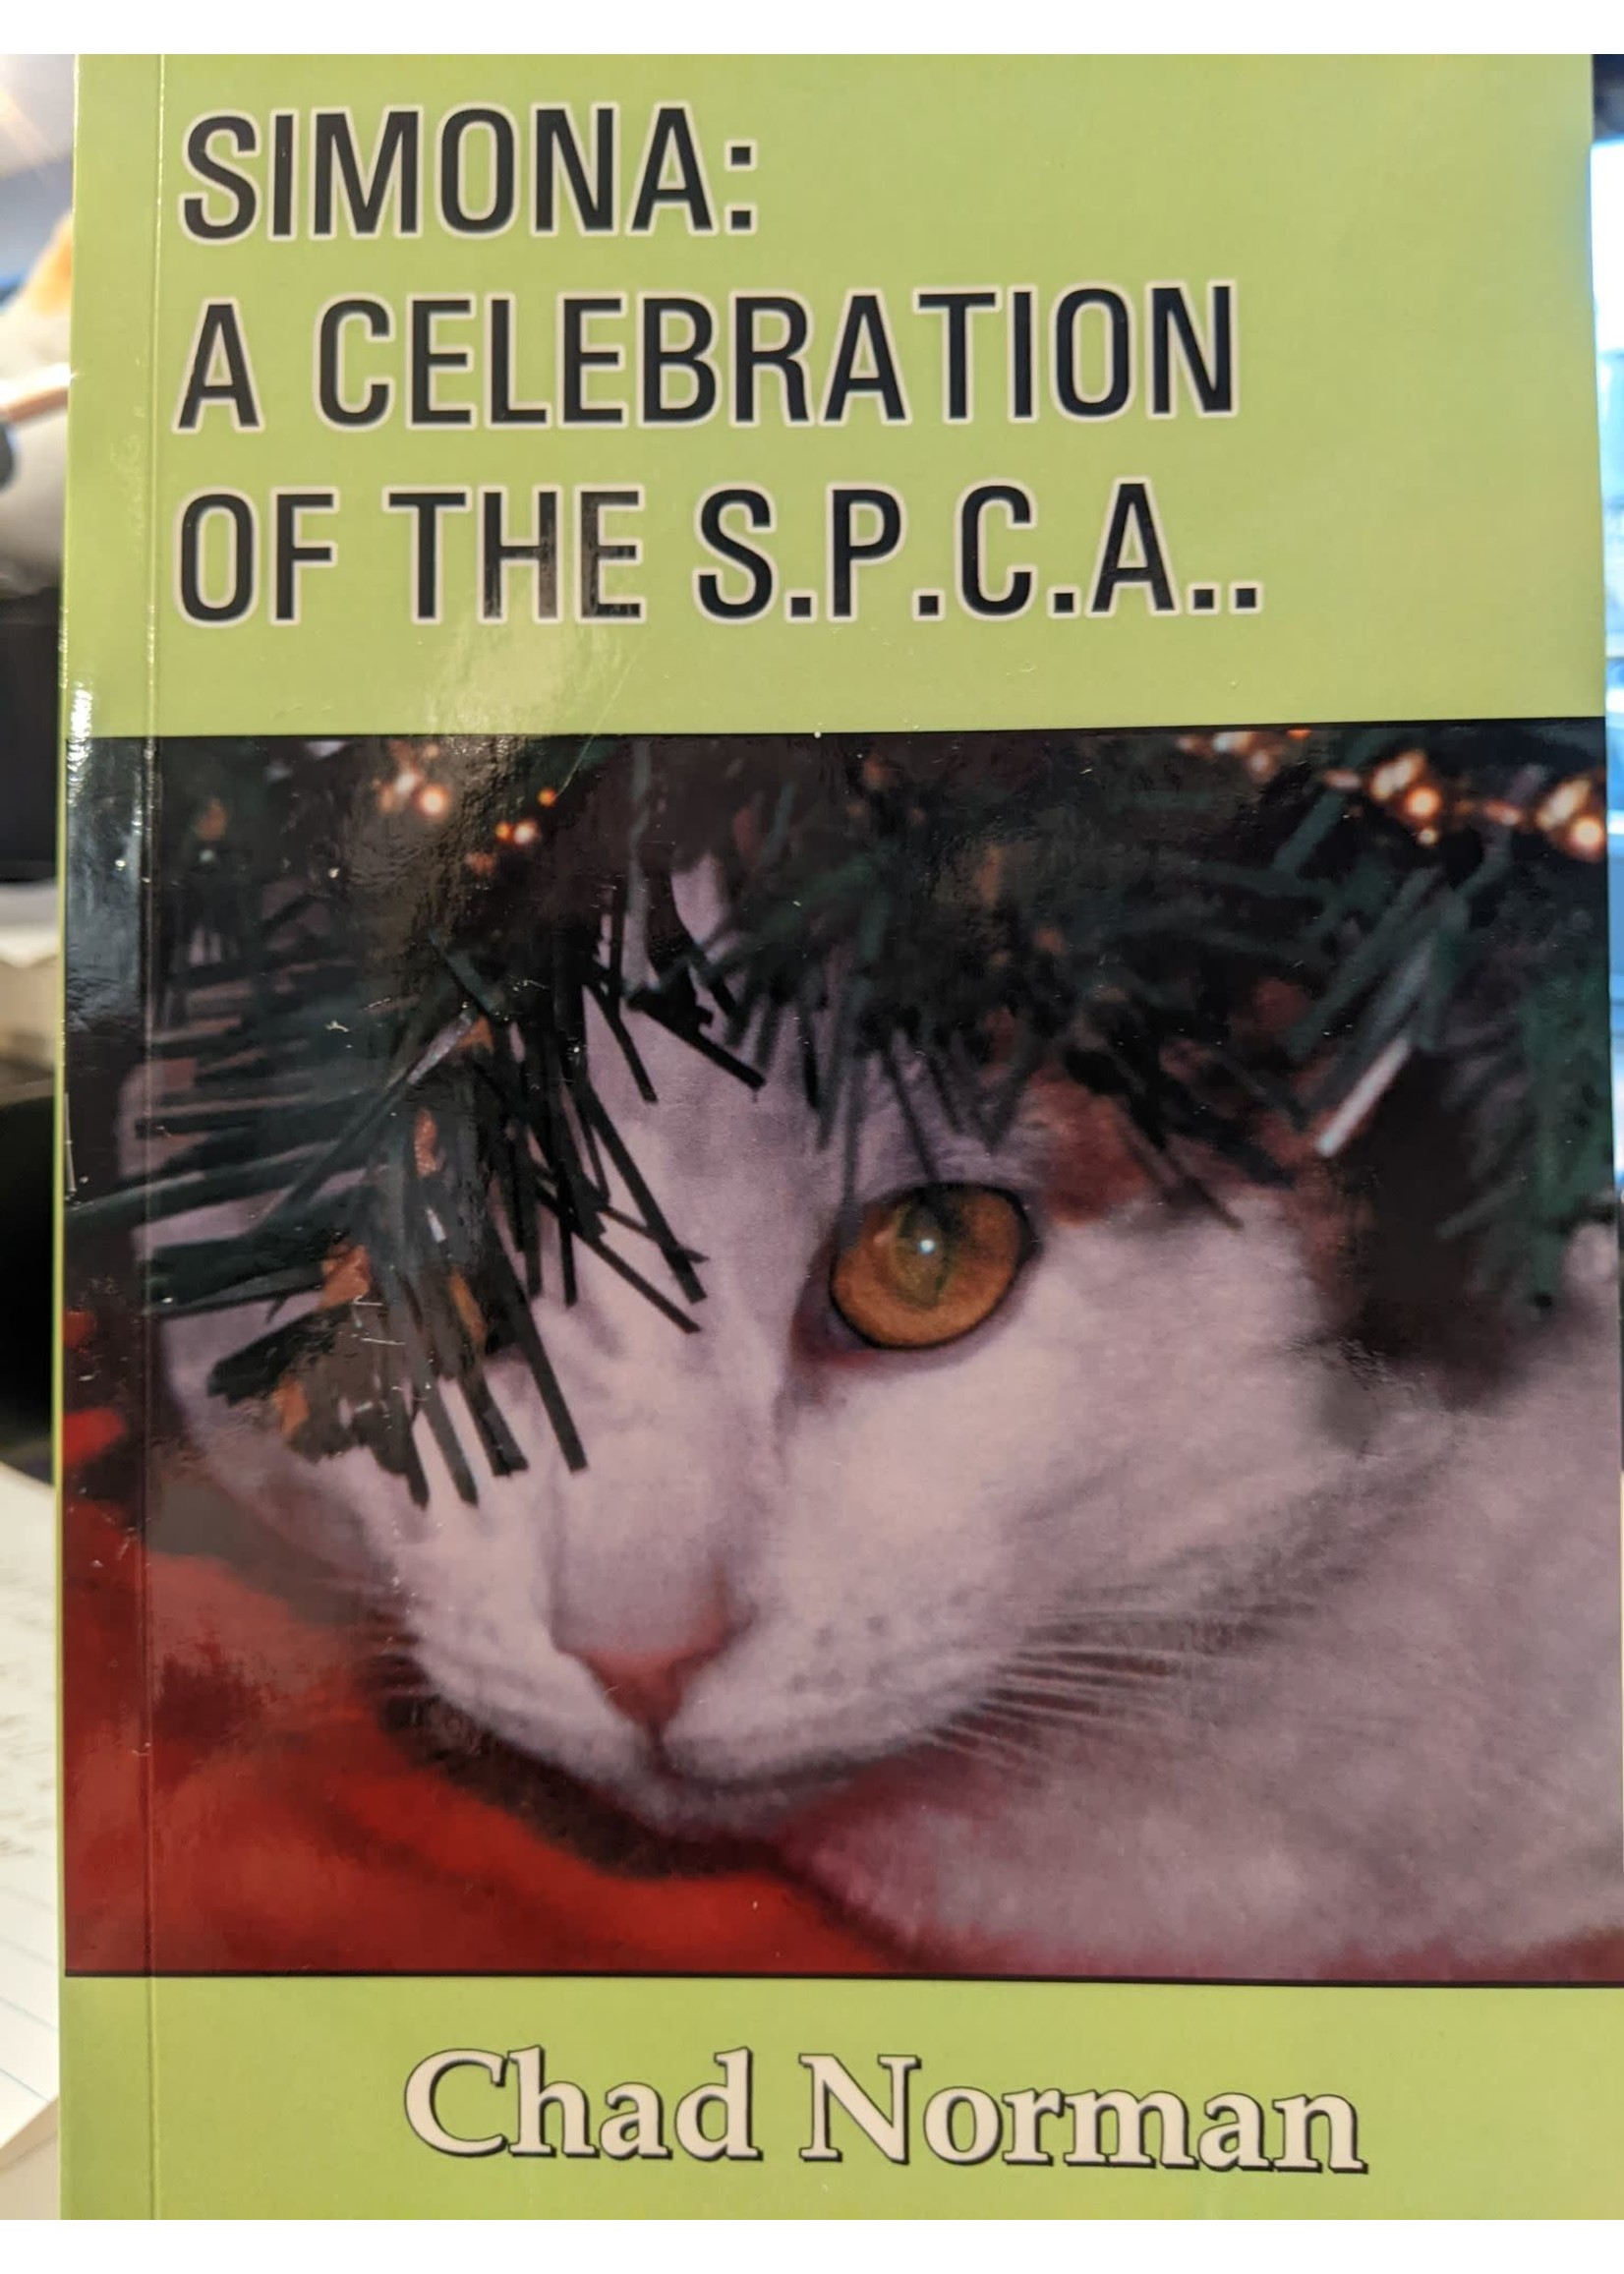 Simona: A Celebration of the SPCA by Chad Norman